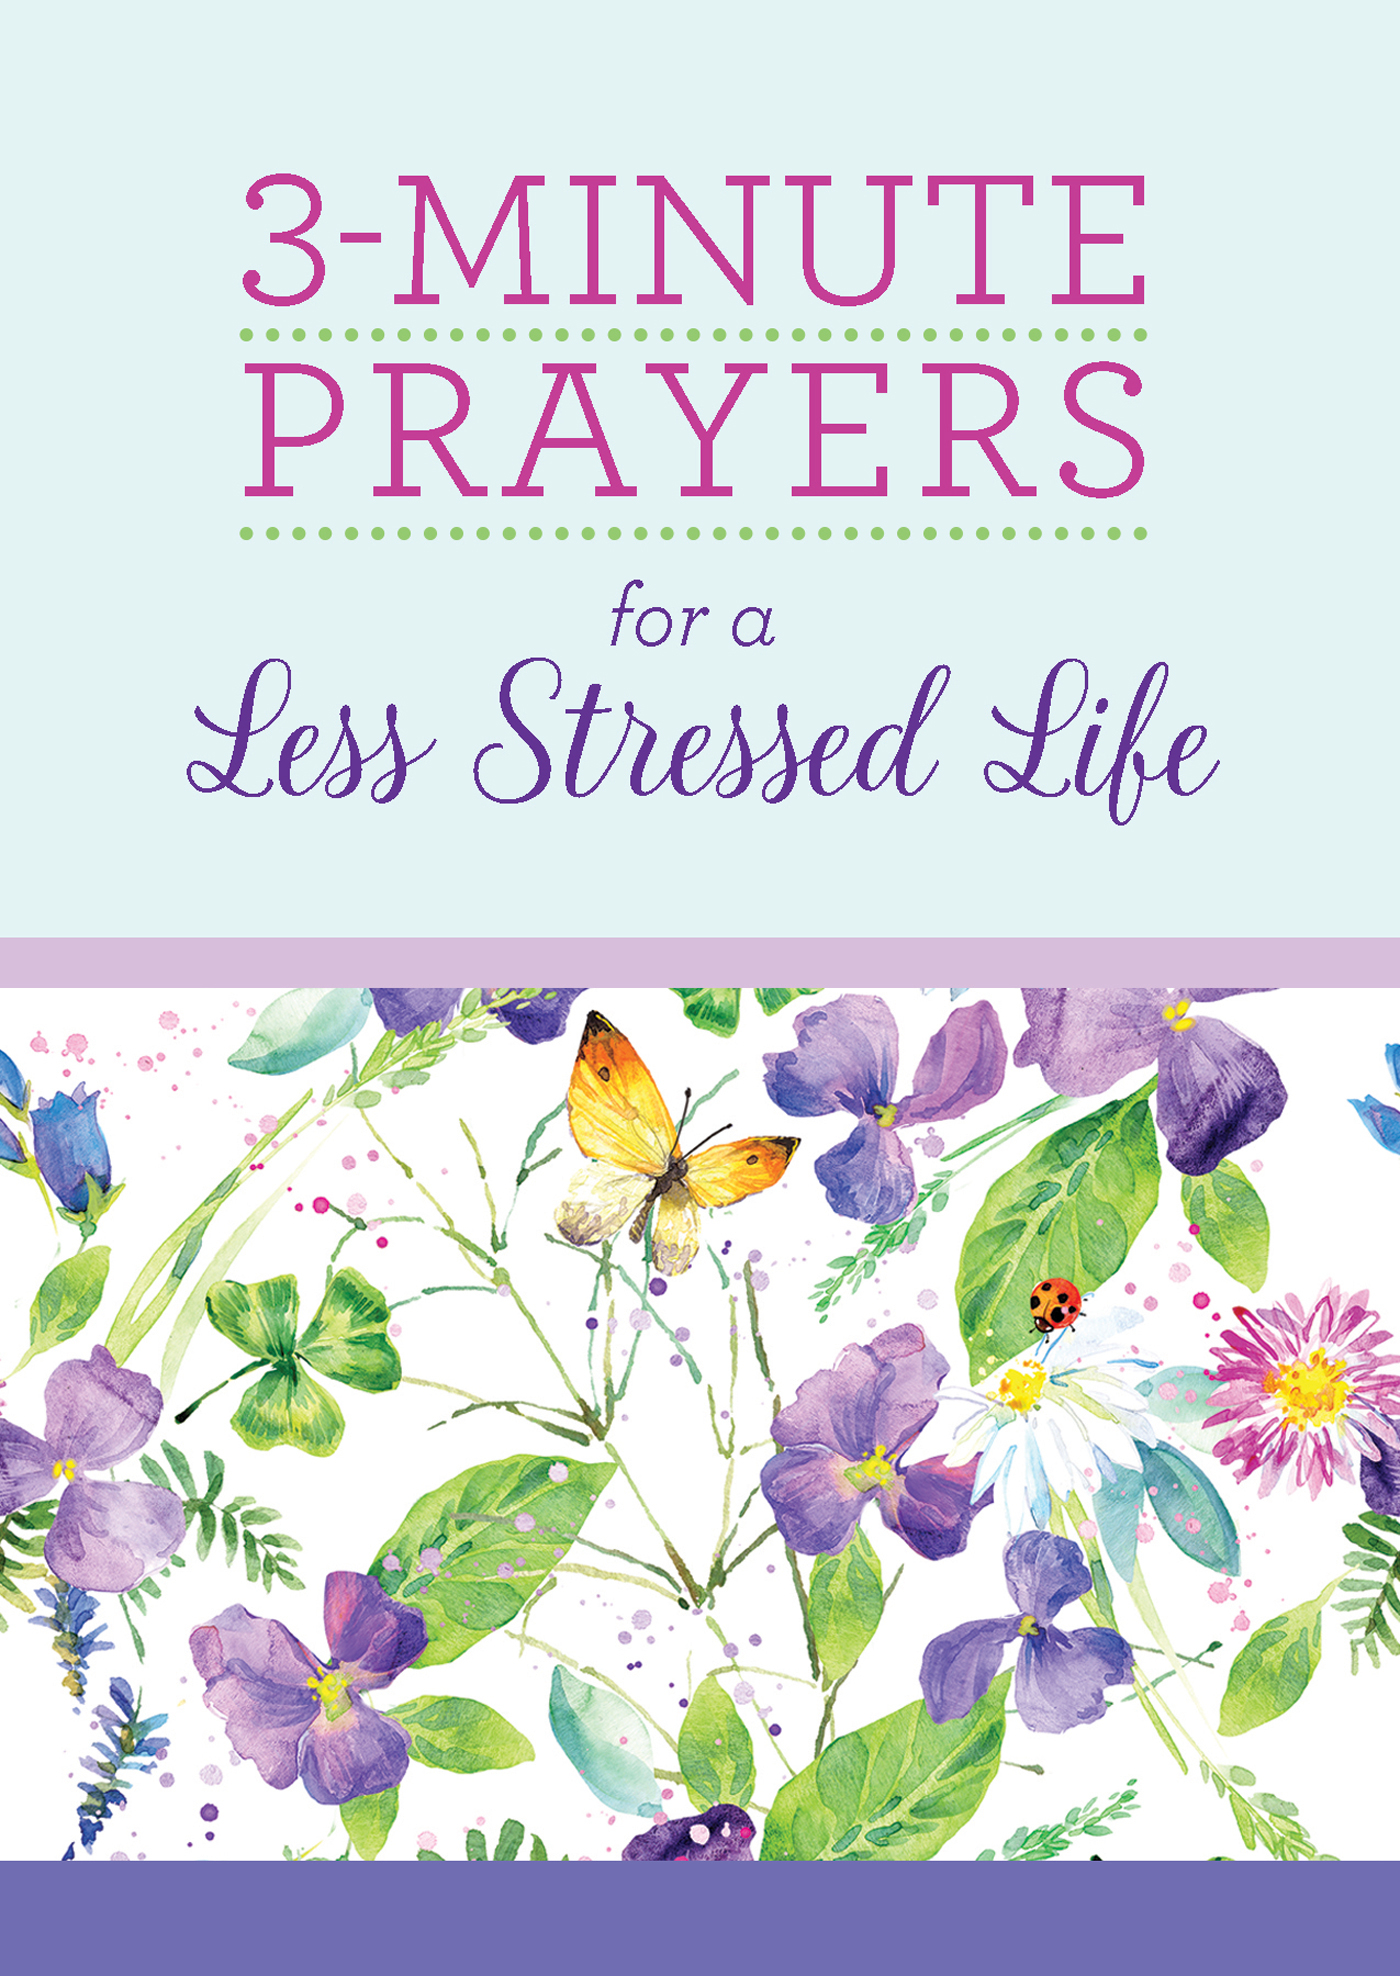 3 MINUTE PRAYERS FOR LESS STRESSED LIFE